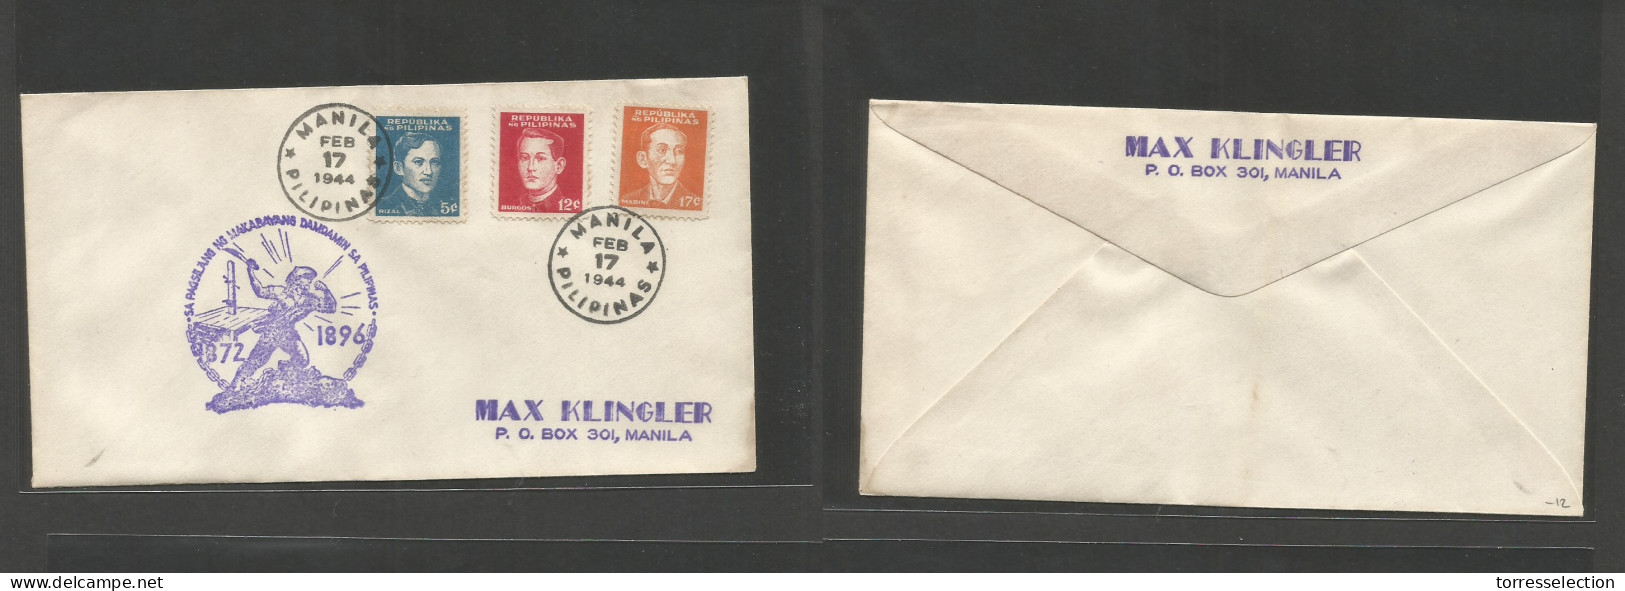 PHILIPPINES. 1944 (17 Febr) Japanese Occup. Local Printed Usage. Special Cachet. Multifkd Env. SALE. - Filipinas